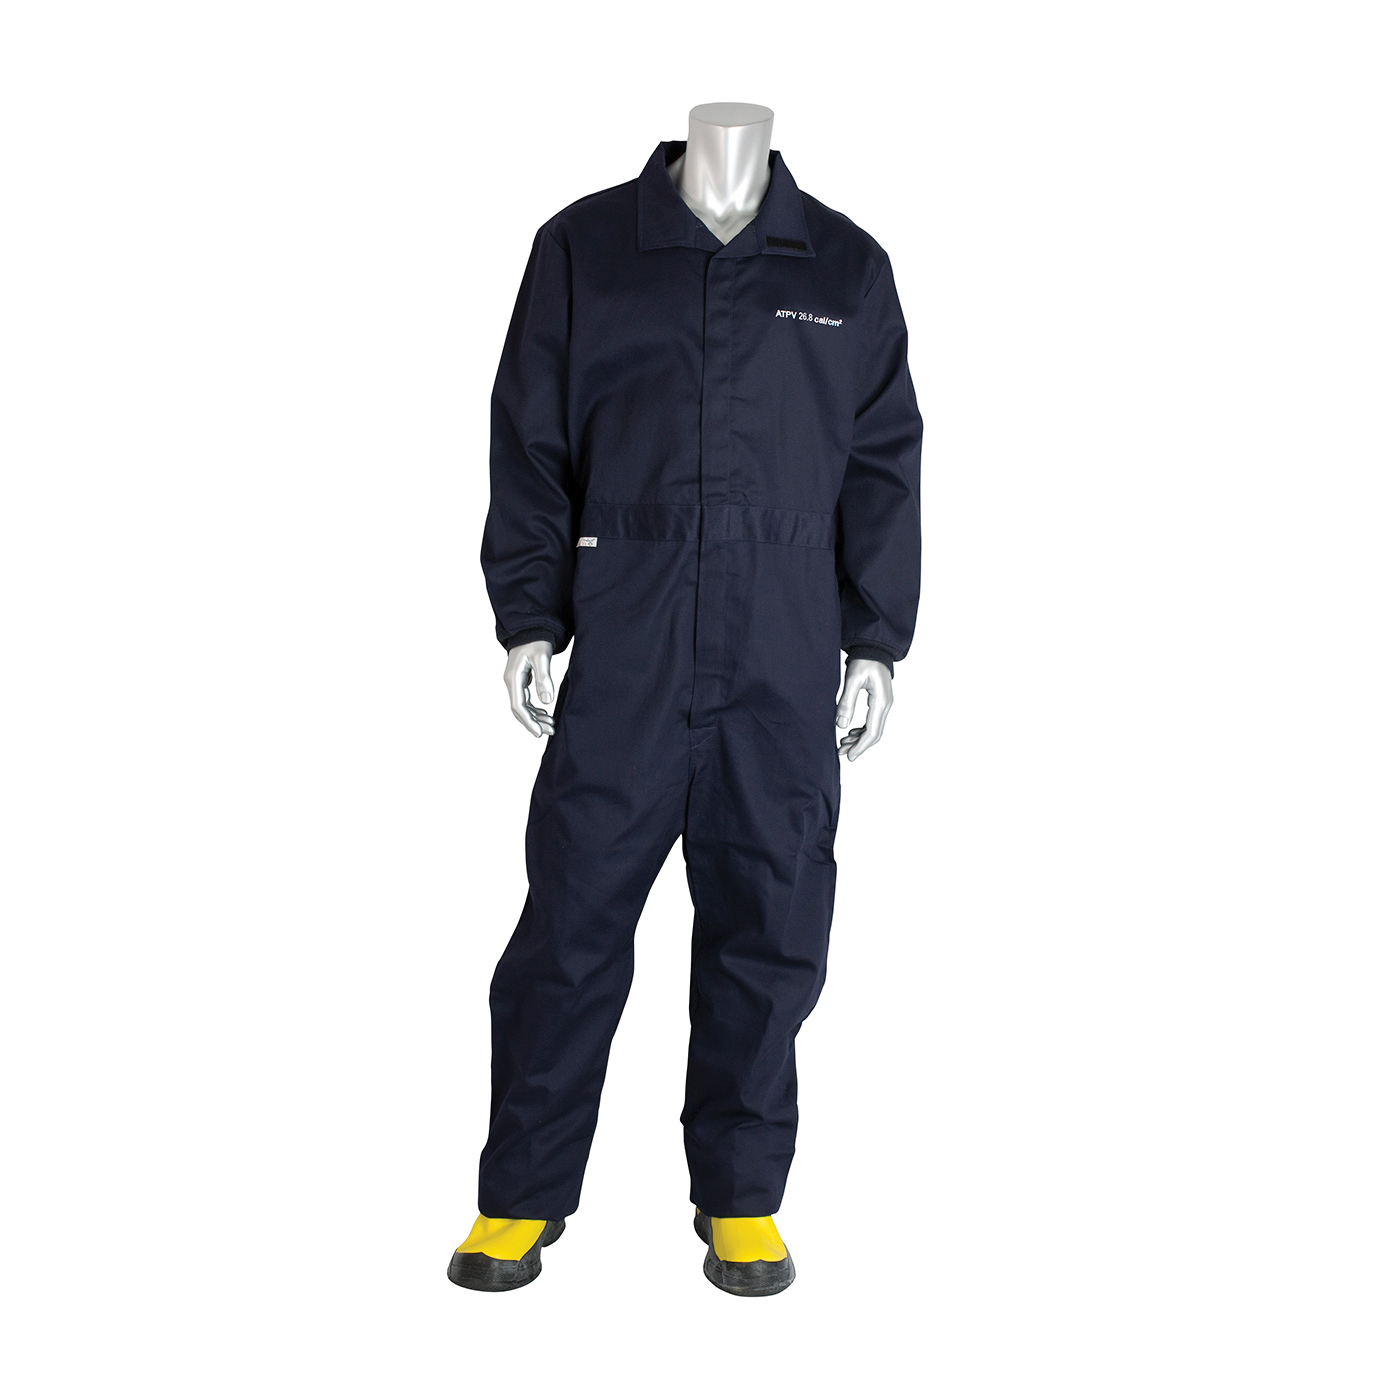 PIP® 9100-52772/XL Flame Resistant Coverall, XL, Navy, Westex® Ultra Soft®/88% Cotton/12% Nylon, 48 to 50 in Chest, 32 in L Inseam